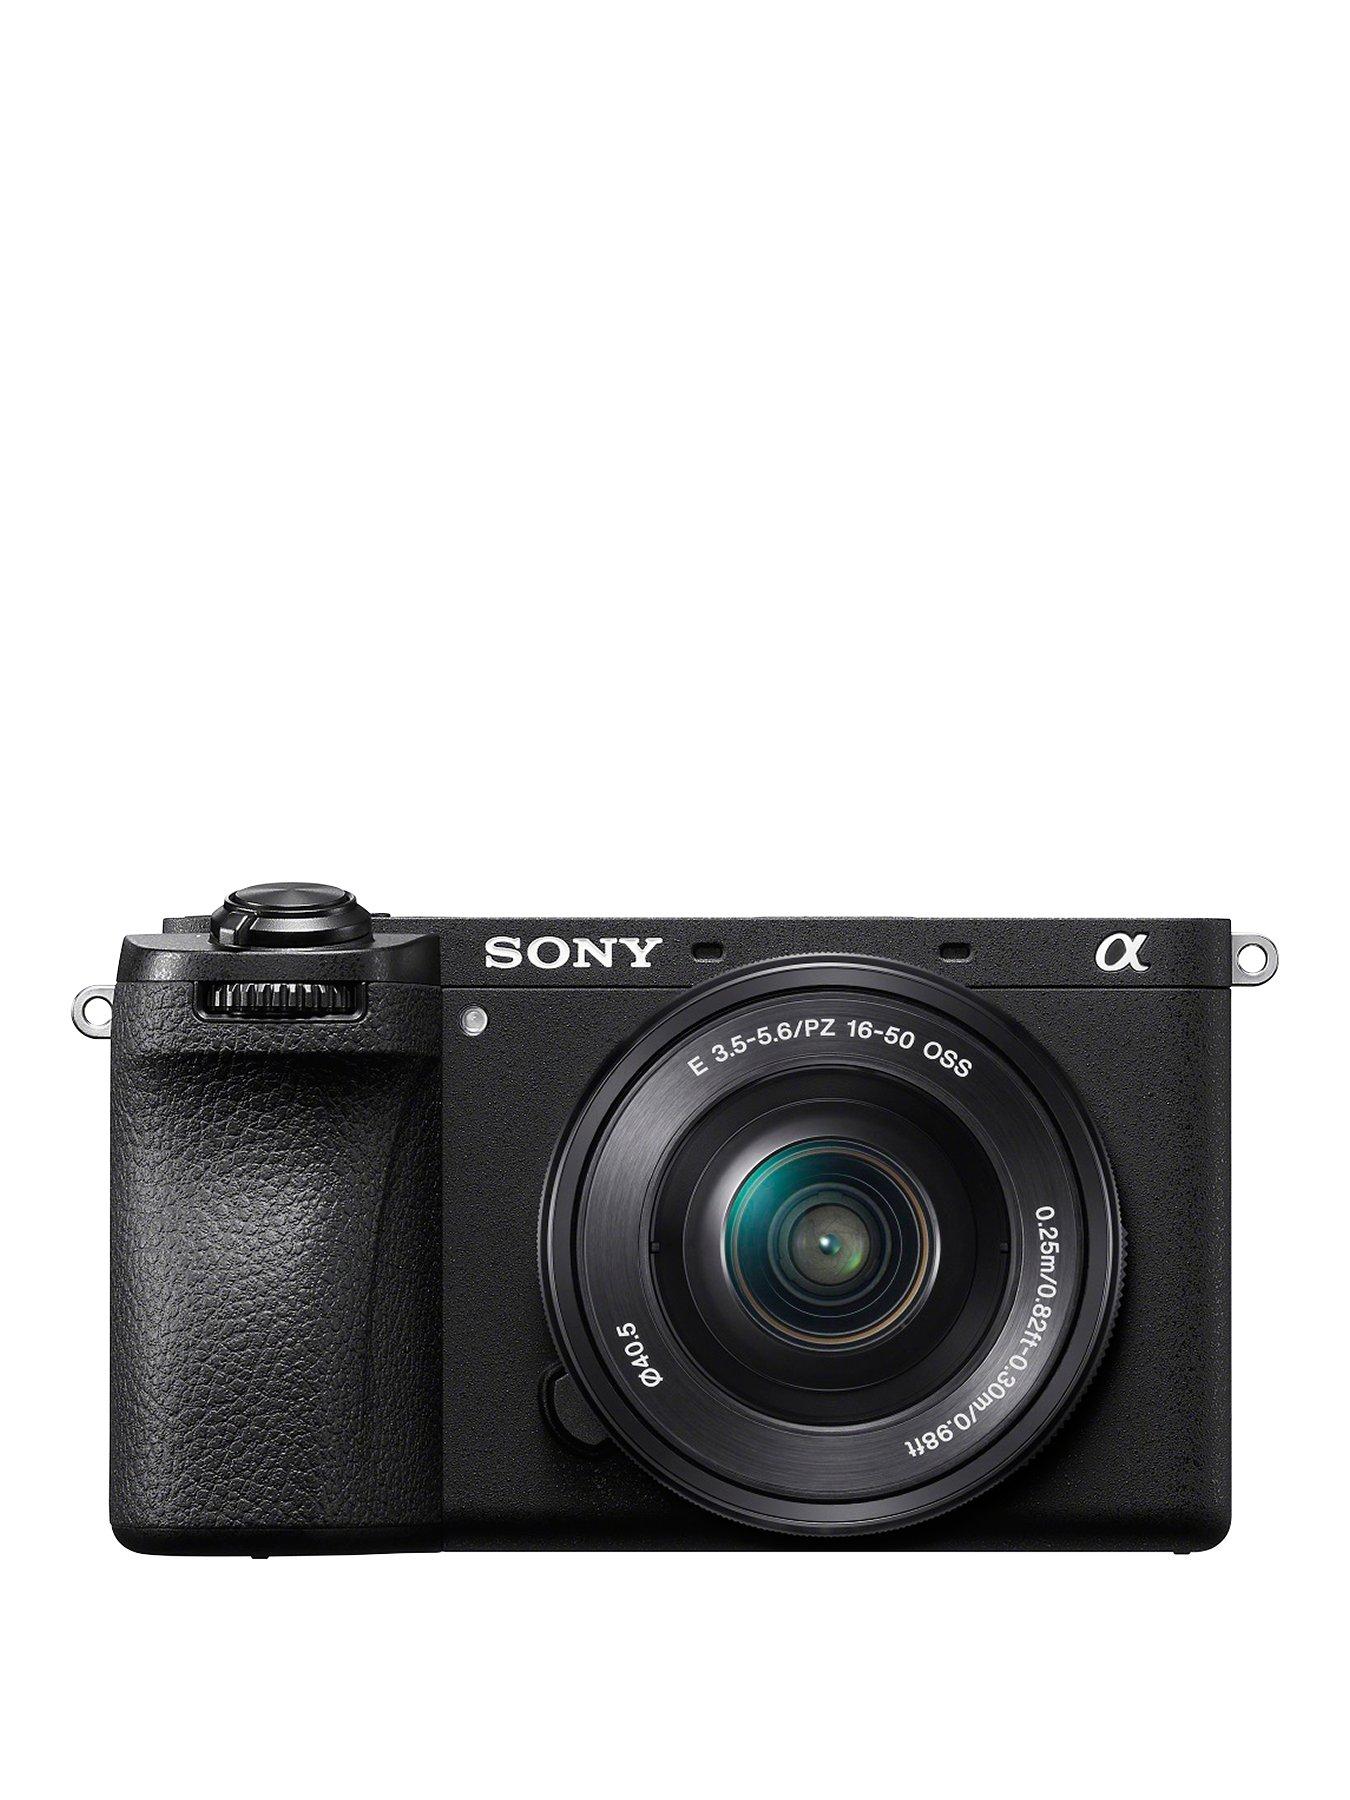 Sony a6100 Mirrorless Camera 4K APS-C ILCE-6100LB with 16-50mm F3